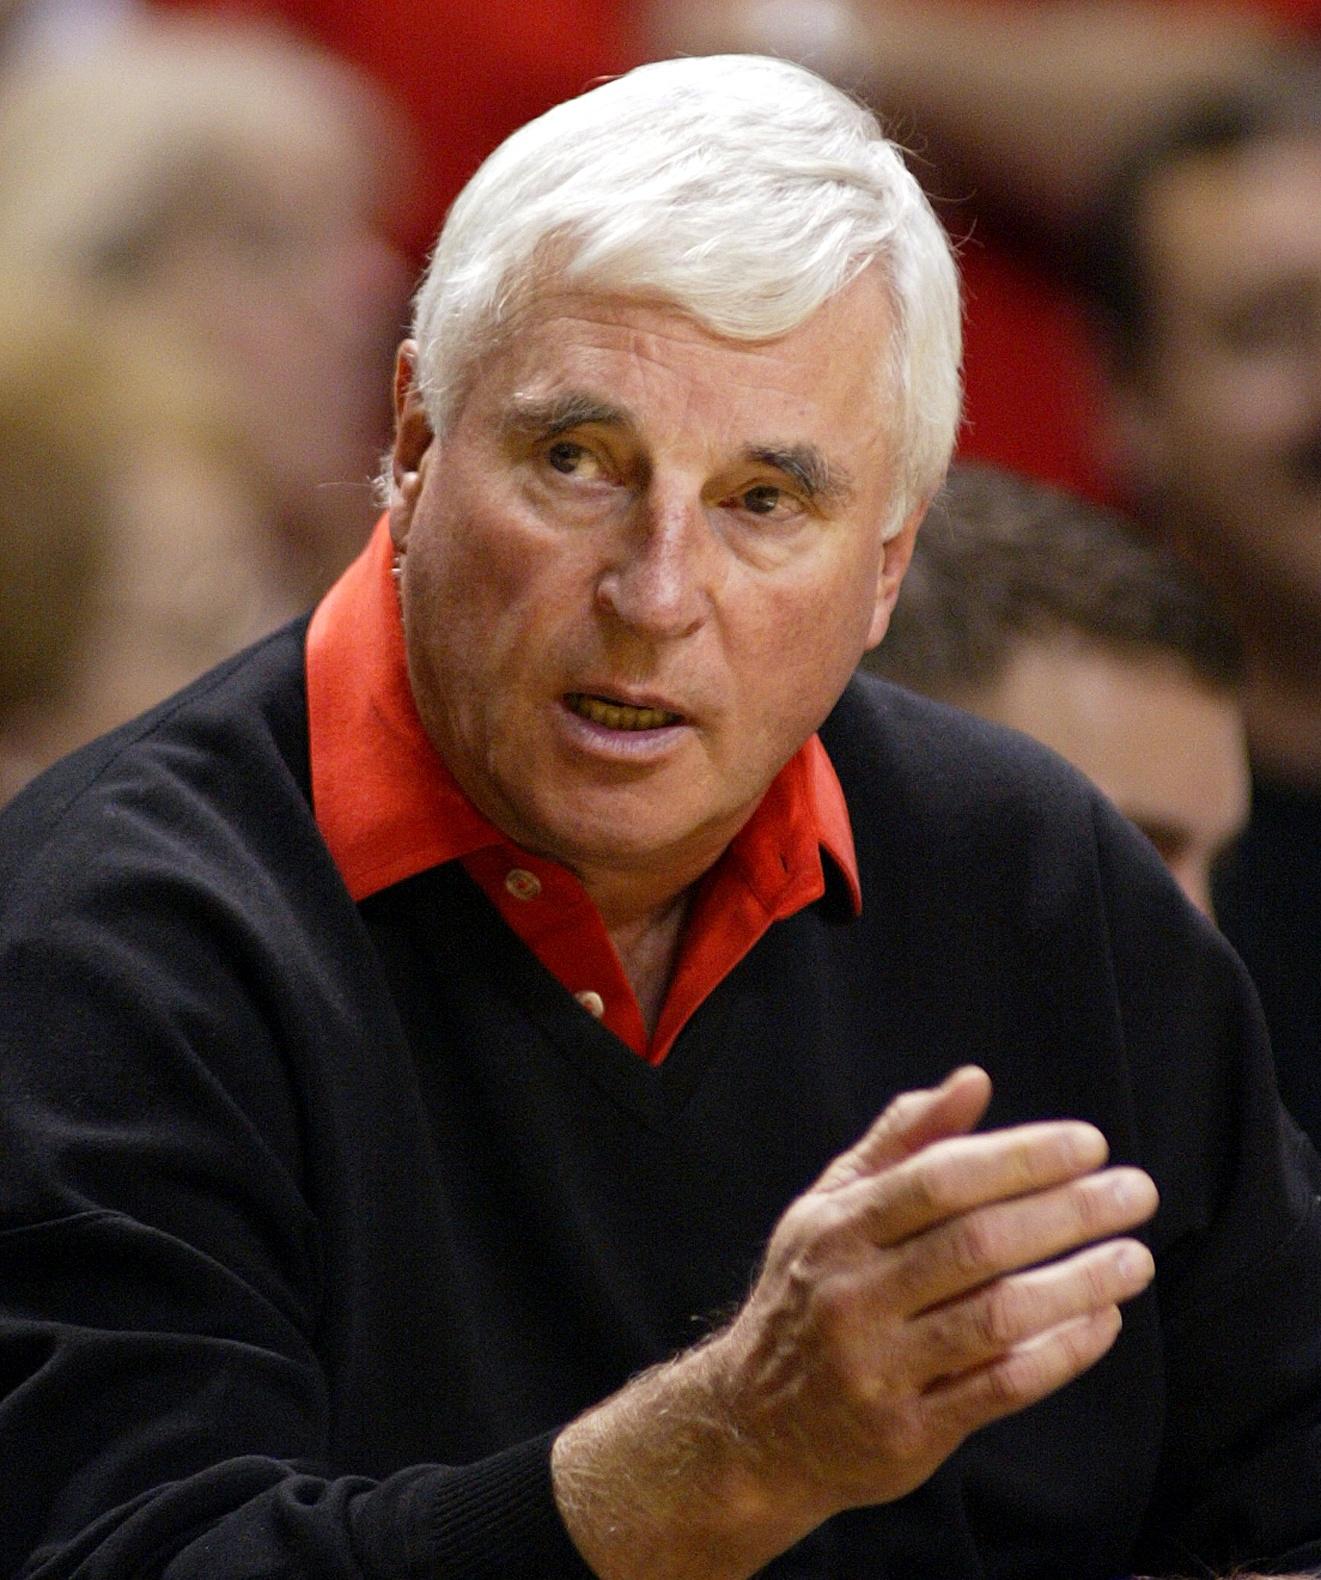 Bob Knight watches from the bench during the second period of Texas Tech's game against Baylor University in Lubbock